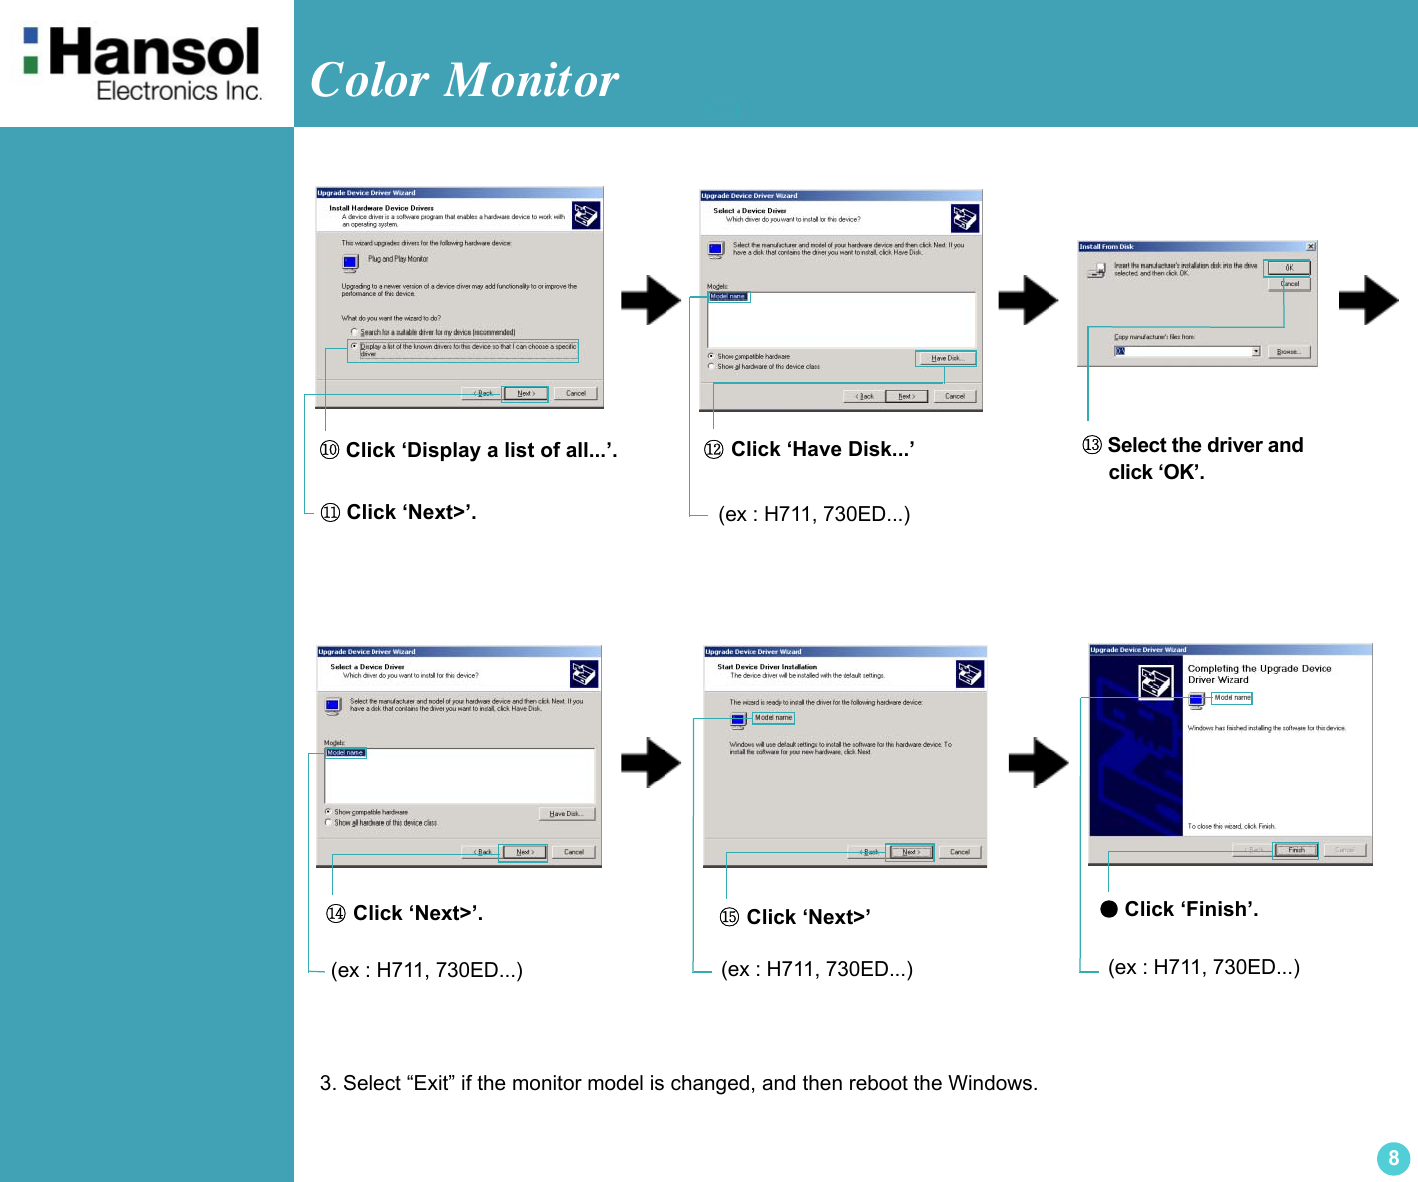 Color Monitor 8●Click ‘Finish’.(ex : H711, 730ED...)⑩ Click ‘Display a list of all...’.⑪ Click ‘Next&gt;’.⑫ Click ‘Have Disk...’⑭ Click ‘Next&gt;’. ⑮ Click ‘Next&gt;’⑬ Select the driver and      click ‘OK’.3. Select “Exit” if the monitor model is changed, and then reboot the Windows.(ex : H711, 730ED...)(ex : H711, 730ED...) (ex : H711, 730ED...)